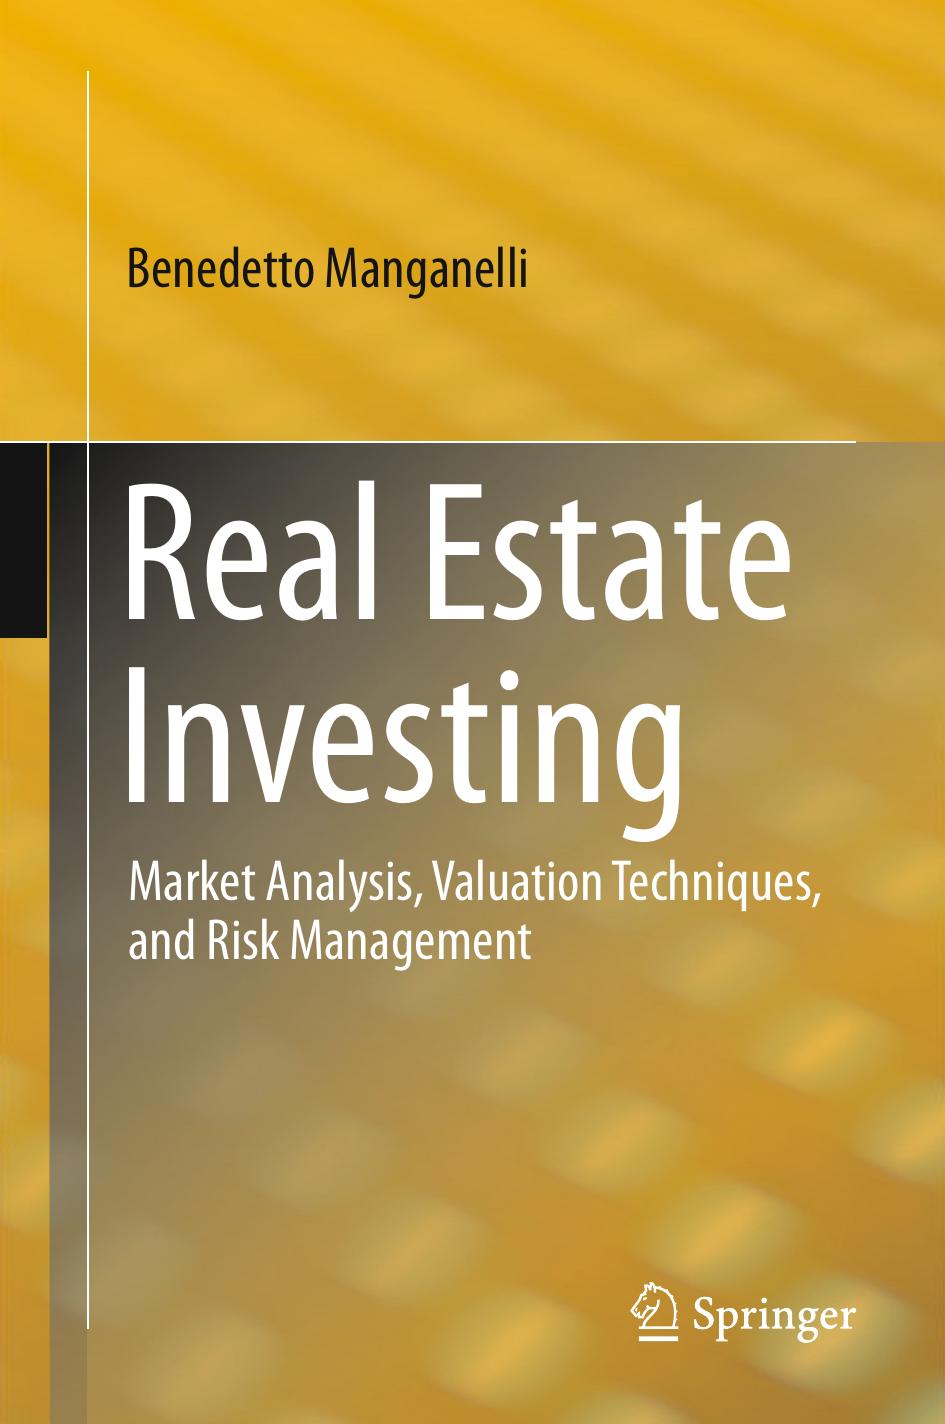 Real Estate Investing  Market Analysis, Valuation Techniques, and Risk Management, (2015)